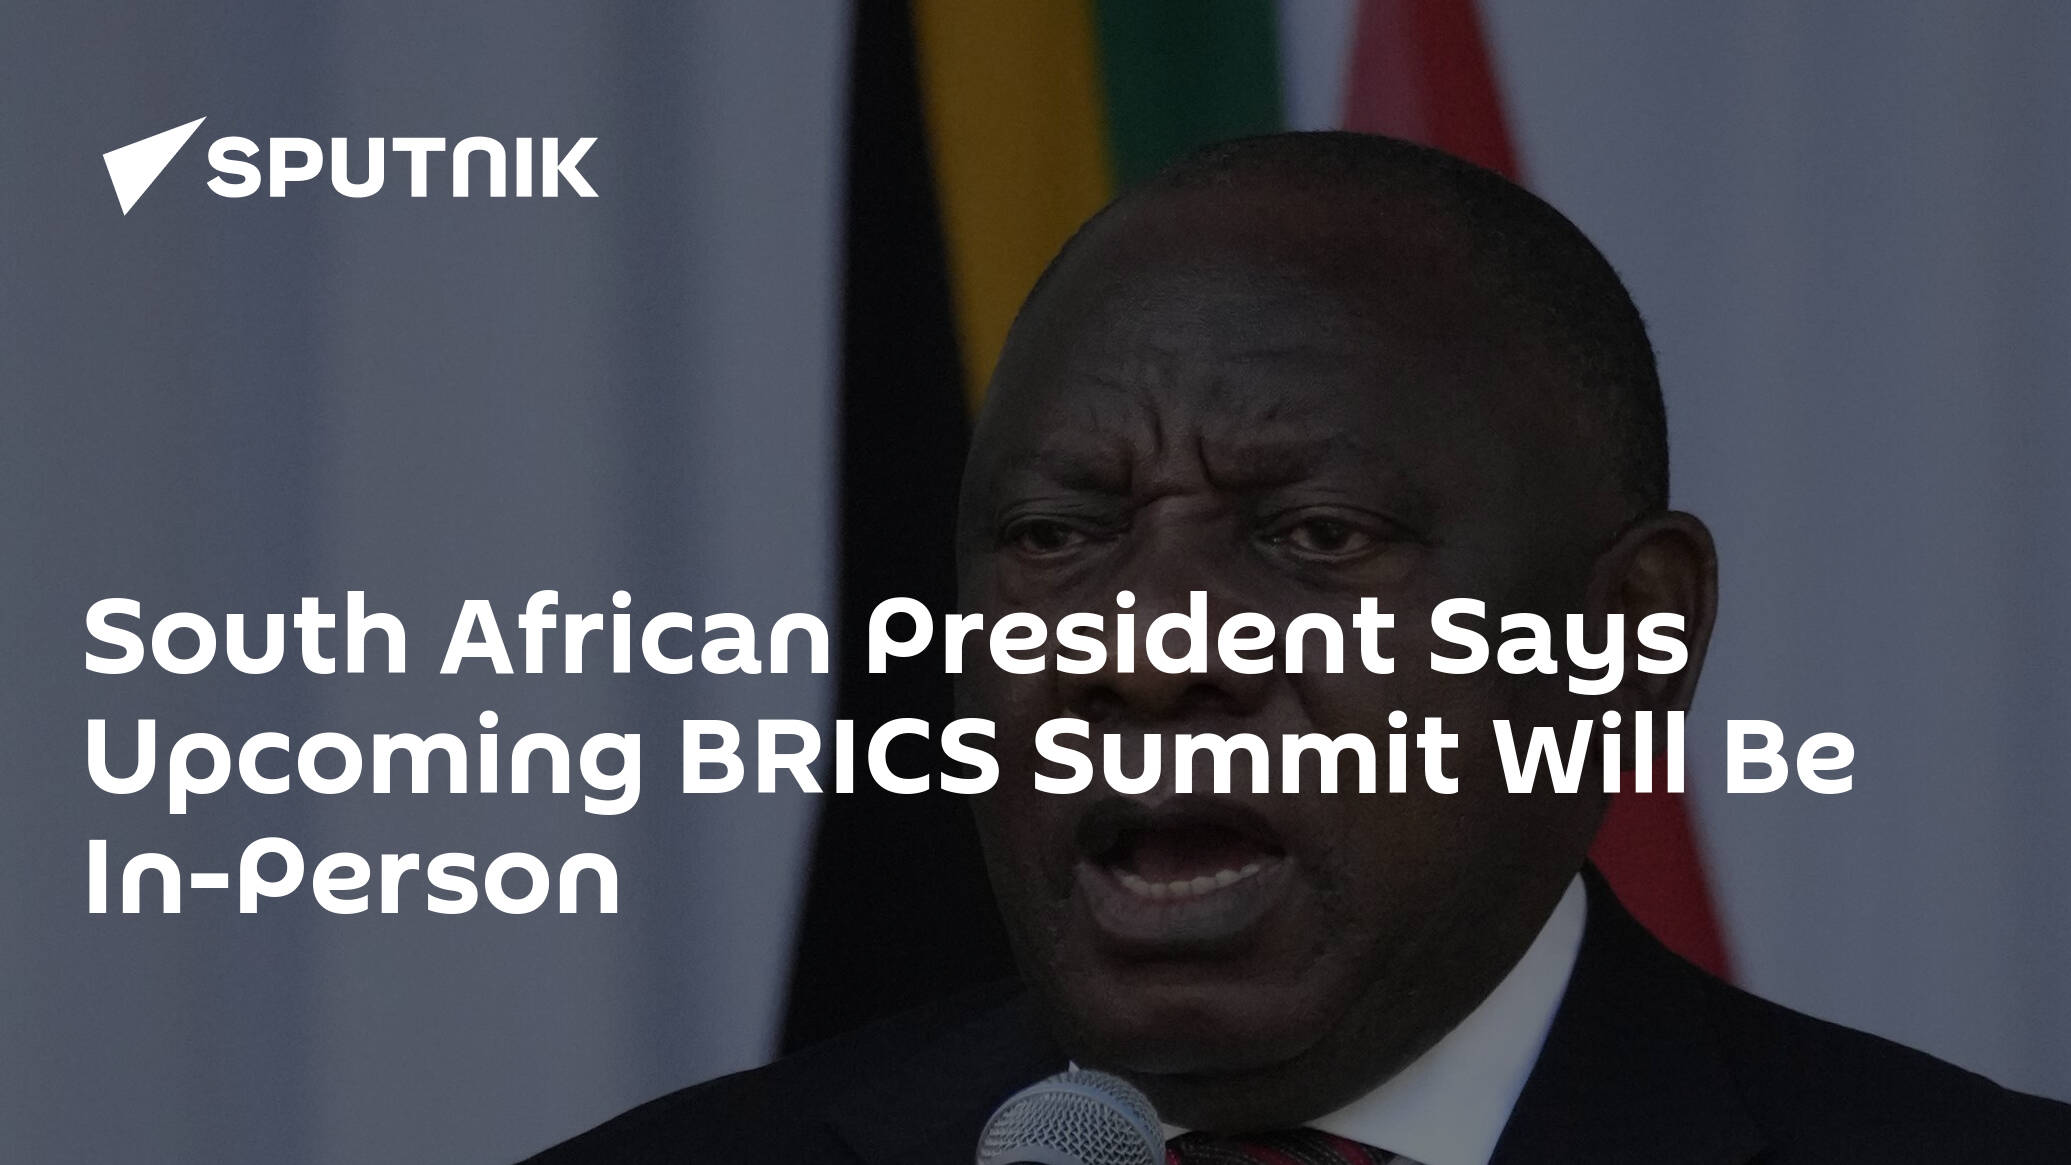 South African President Says Upcoming BRICS Summit Will Be In-Person